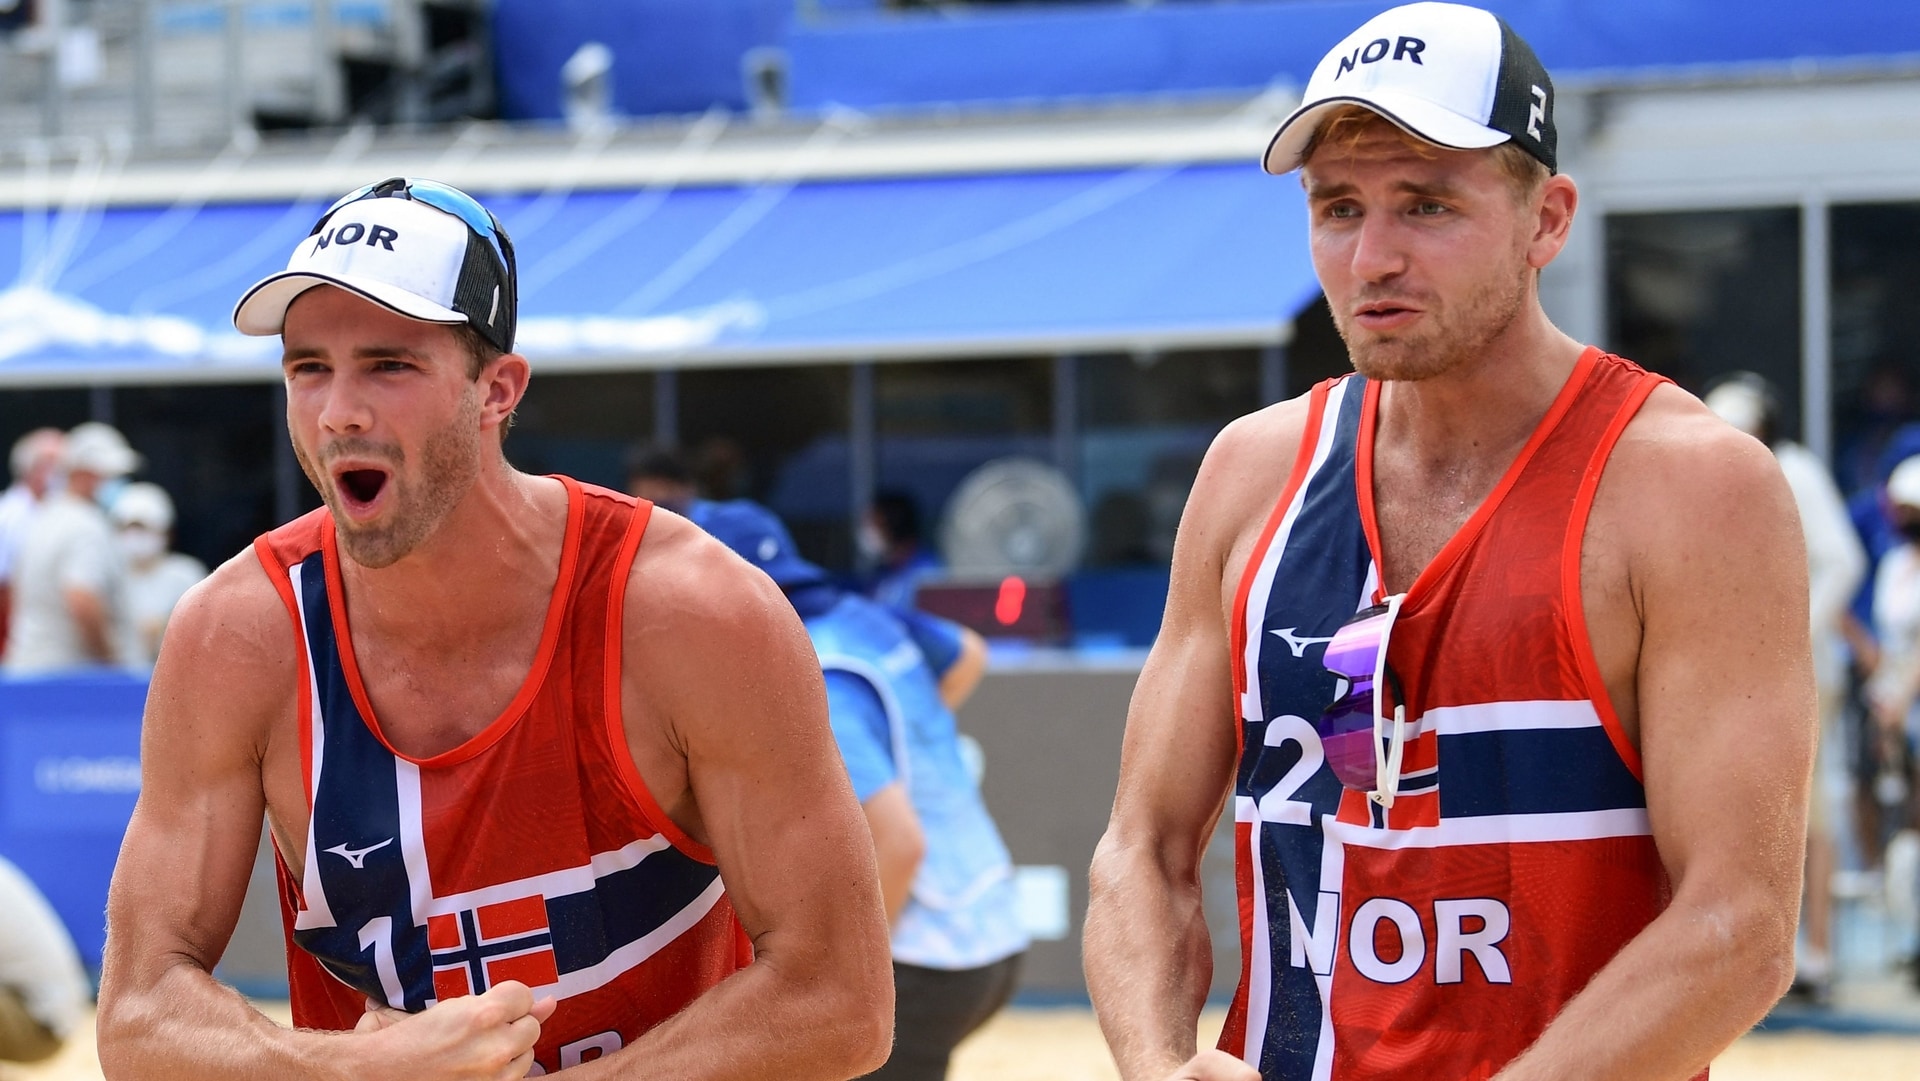 Norway's Anders Mol, Christian Sorum Beat ROC to Win Beach Volleyball Gold